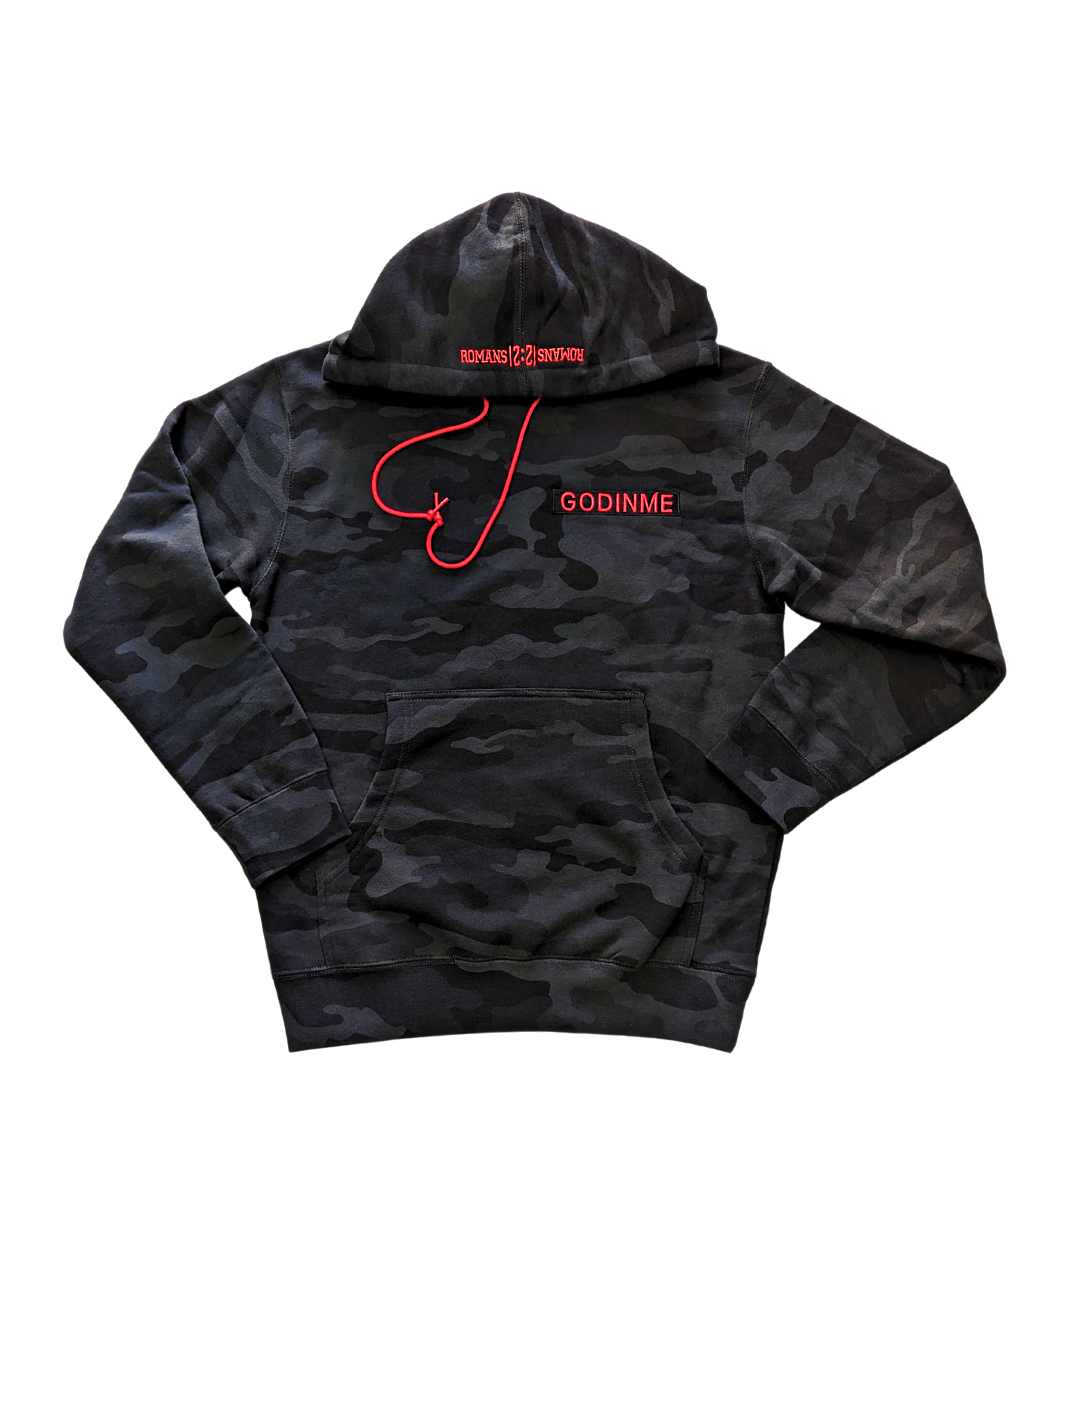 Black pullover hoodie, Exclusive Collection, Red GODinme nameplate, Romans 12 : 21 on hood